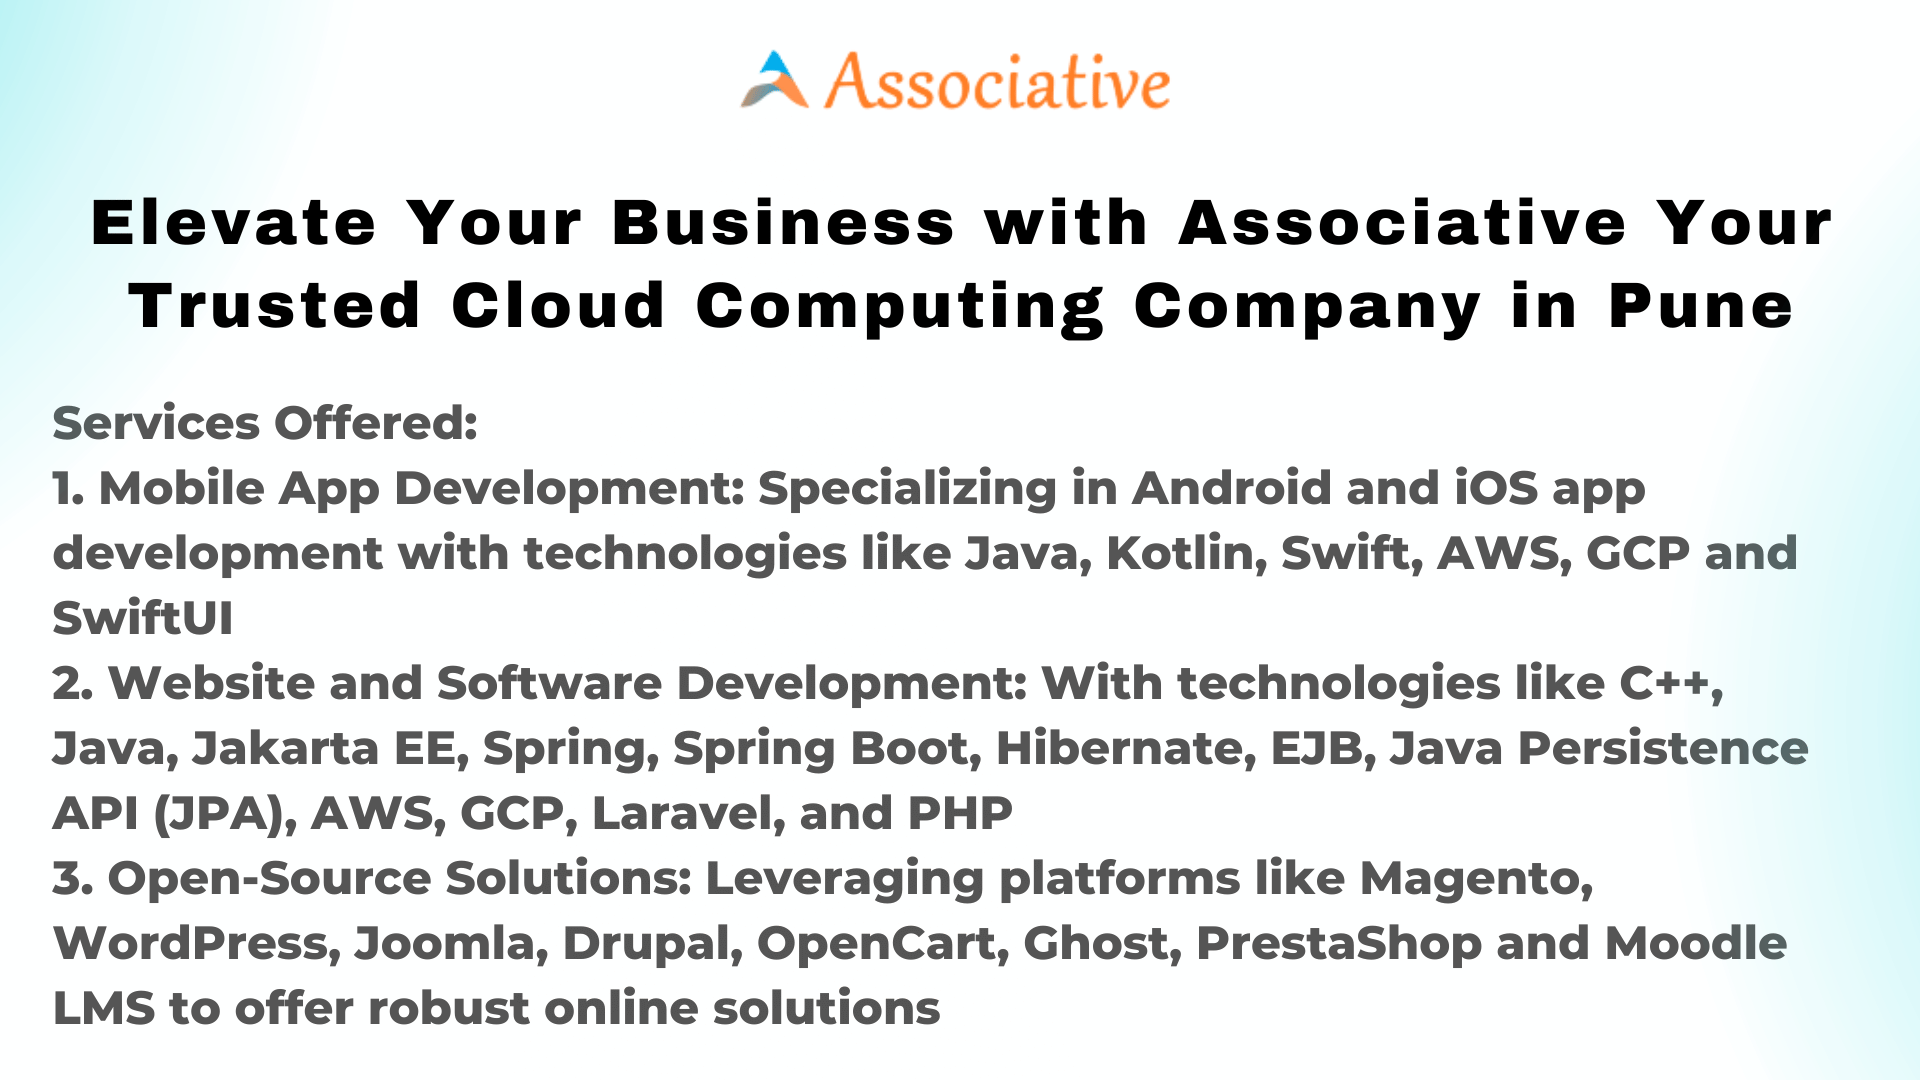 Elevate Your Business with Associative Your Trusted Cloud Computing Company in Pune